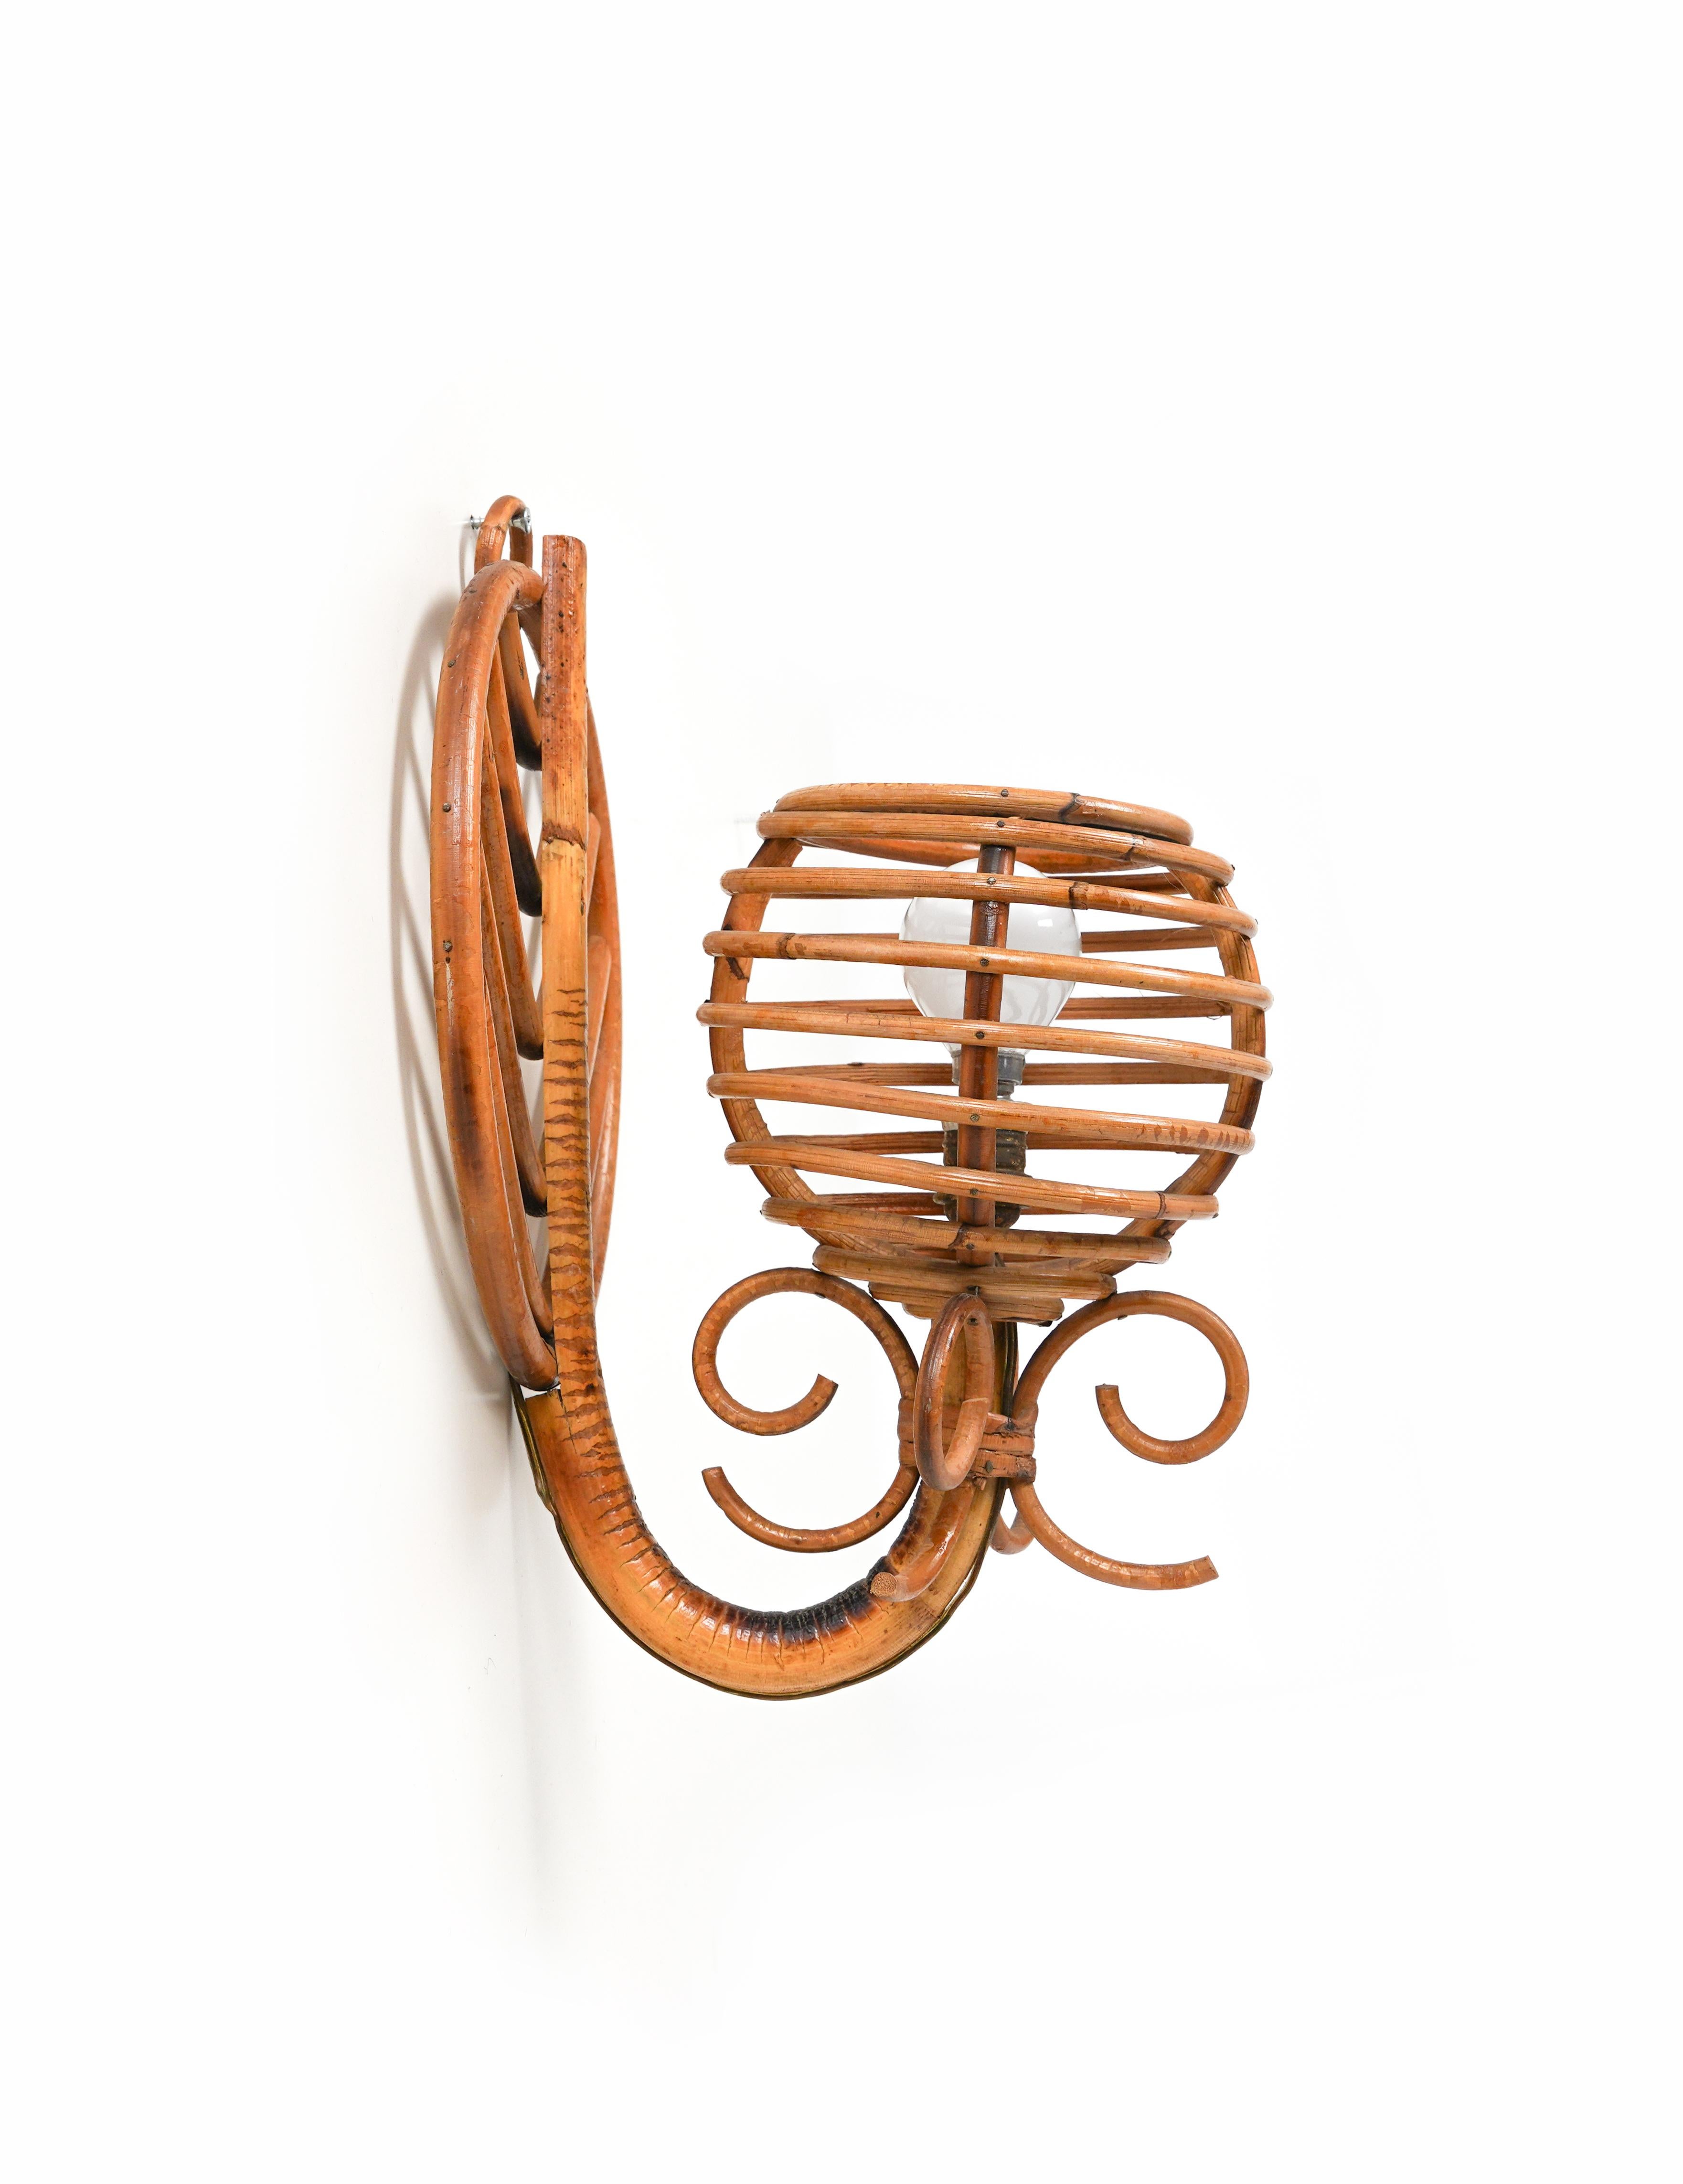 Rattan & Bamboo Pair of Sconces Lantern Attributed to Louis Sognot, France 1960s For Sale 3